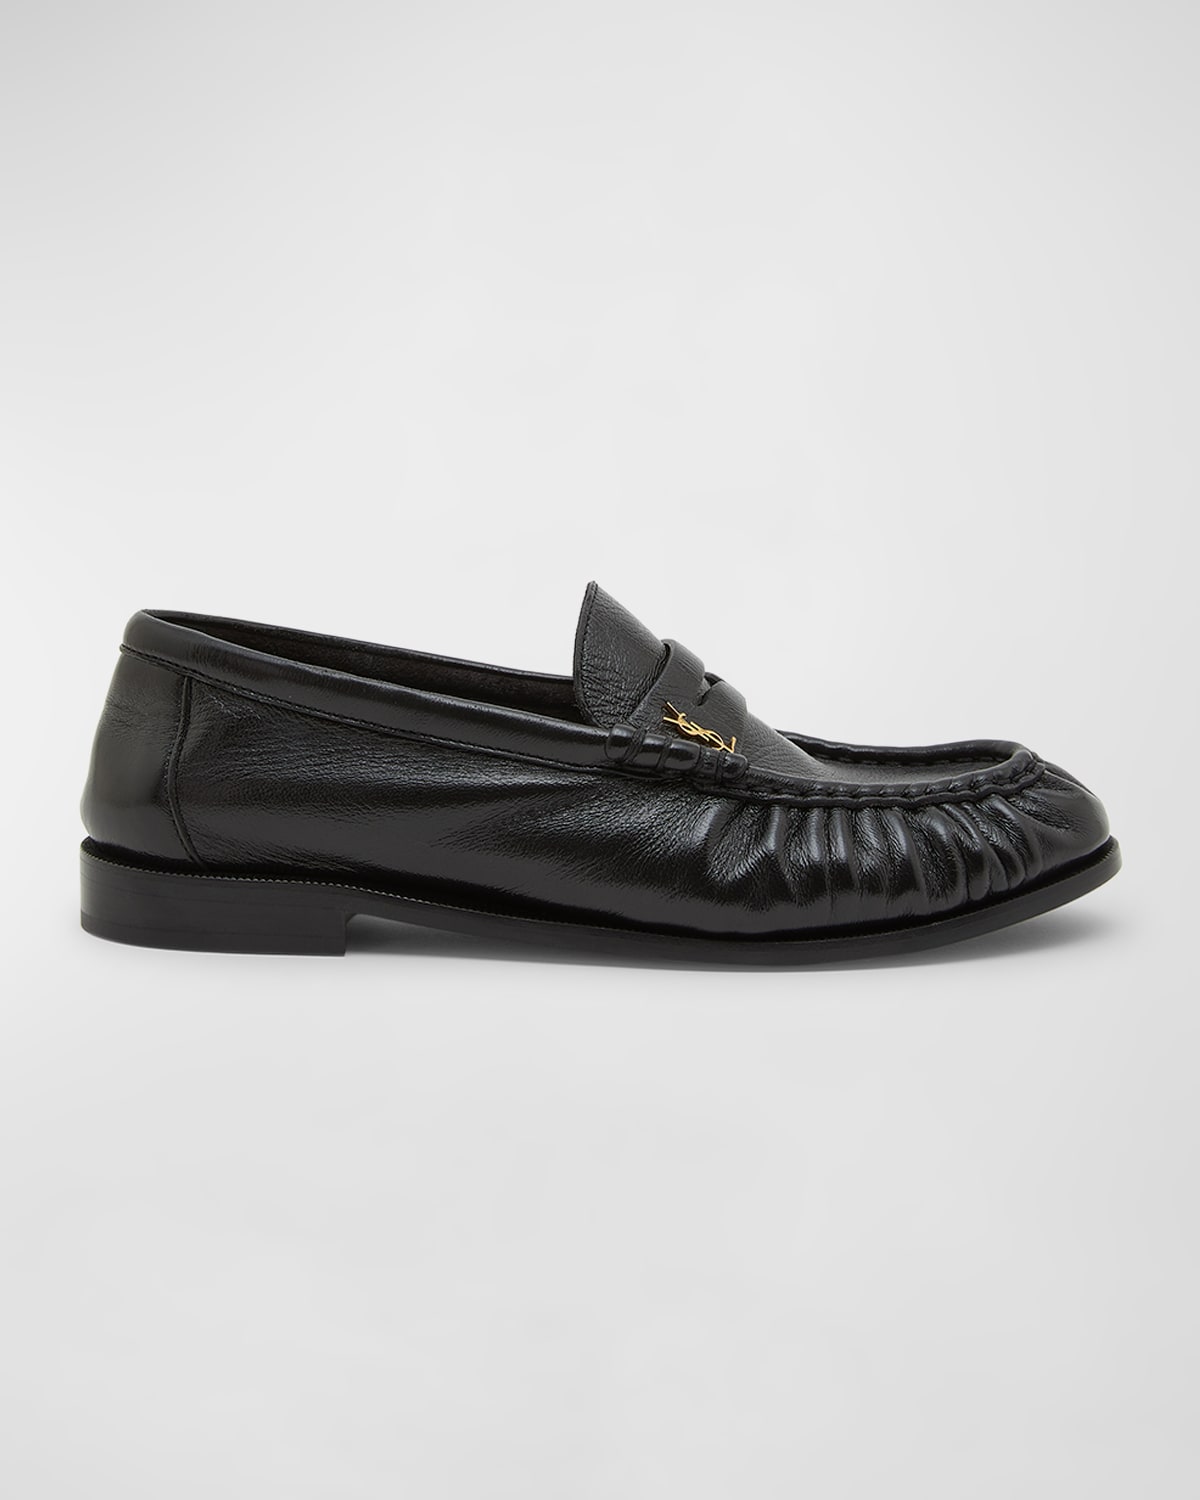 Le Leather YSL Penny Loafers